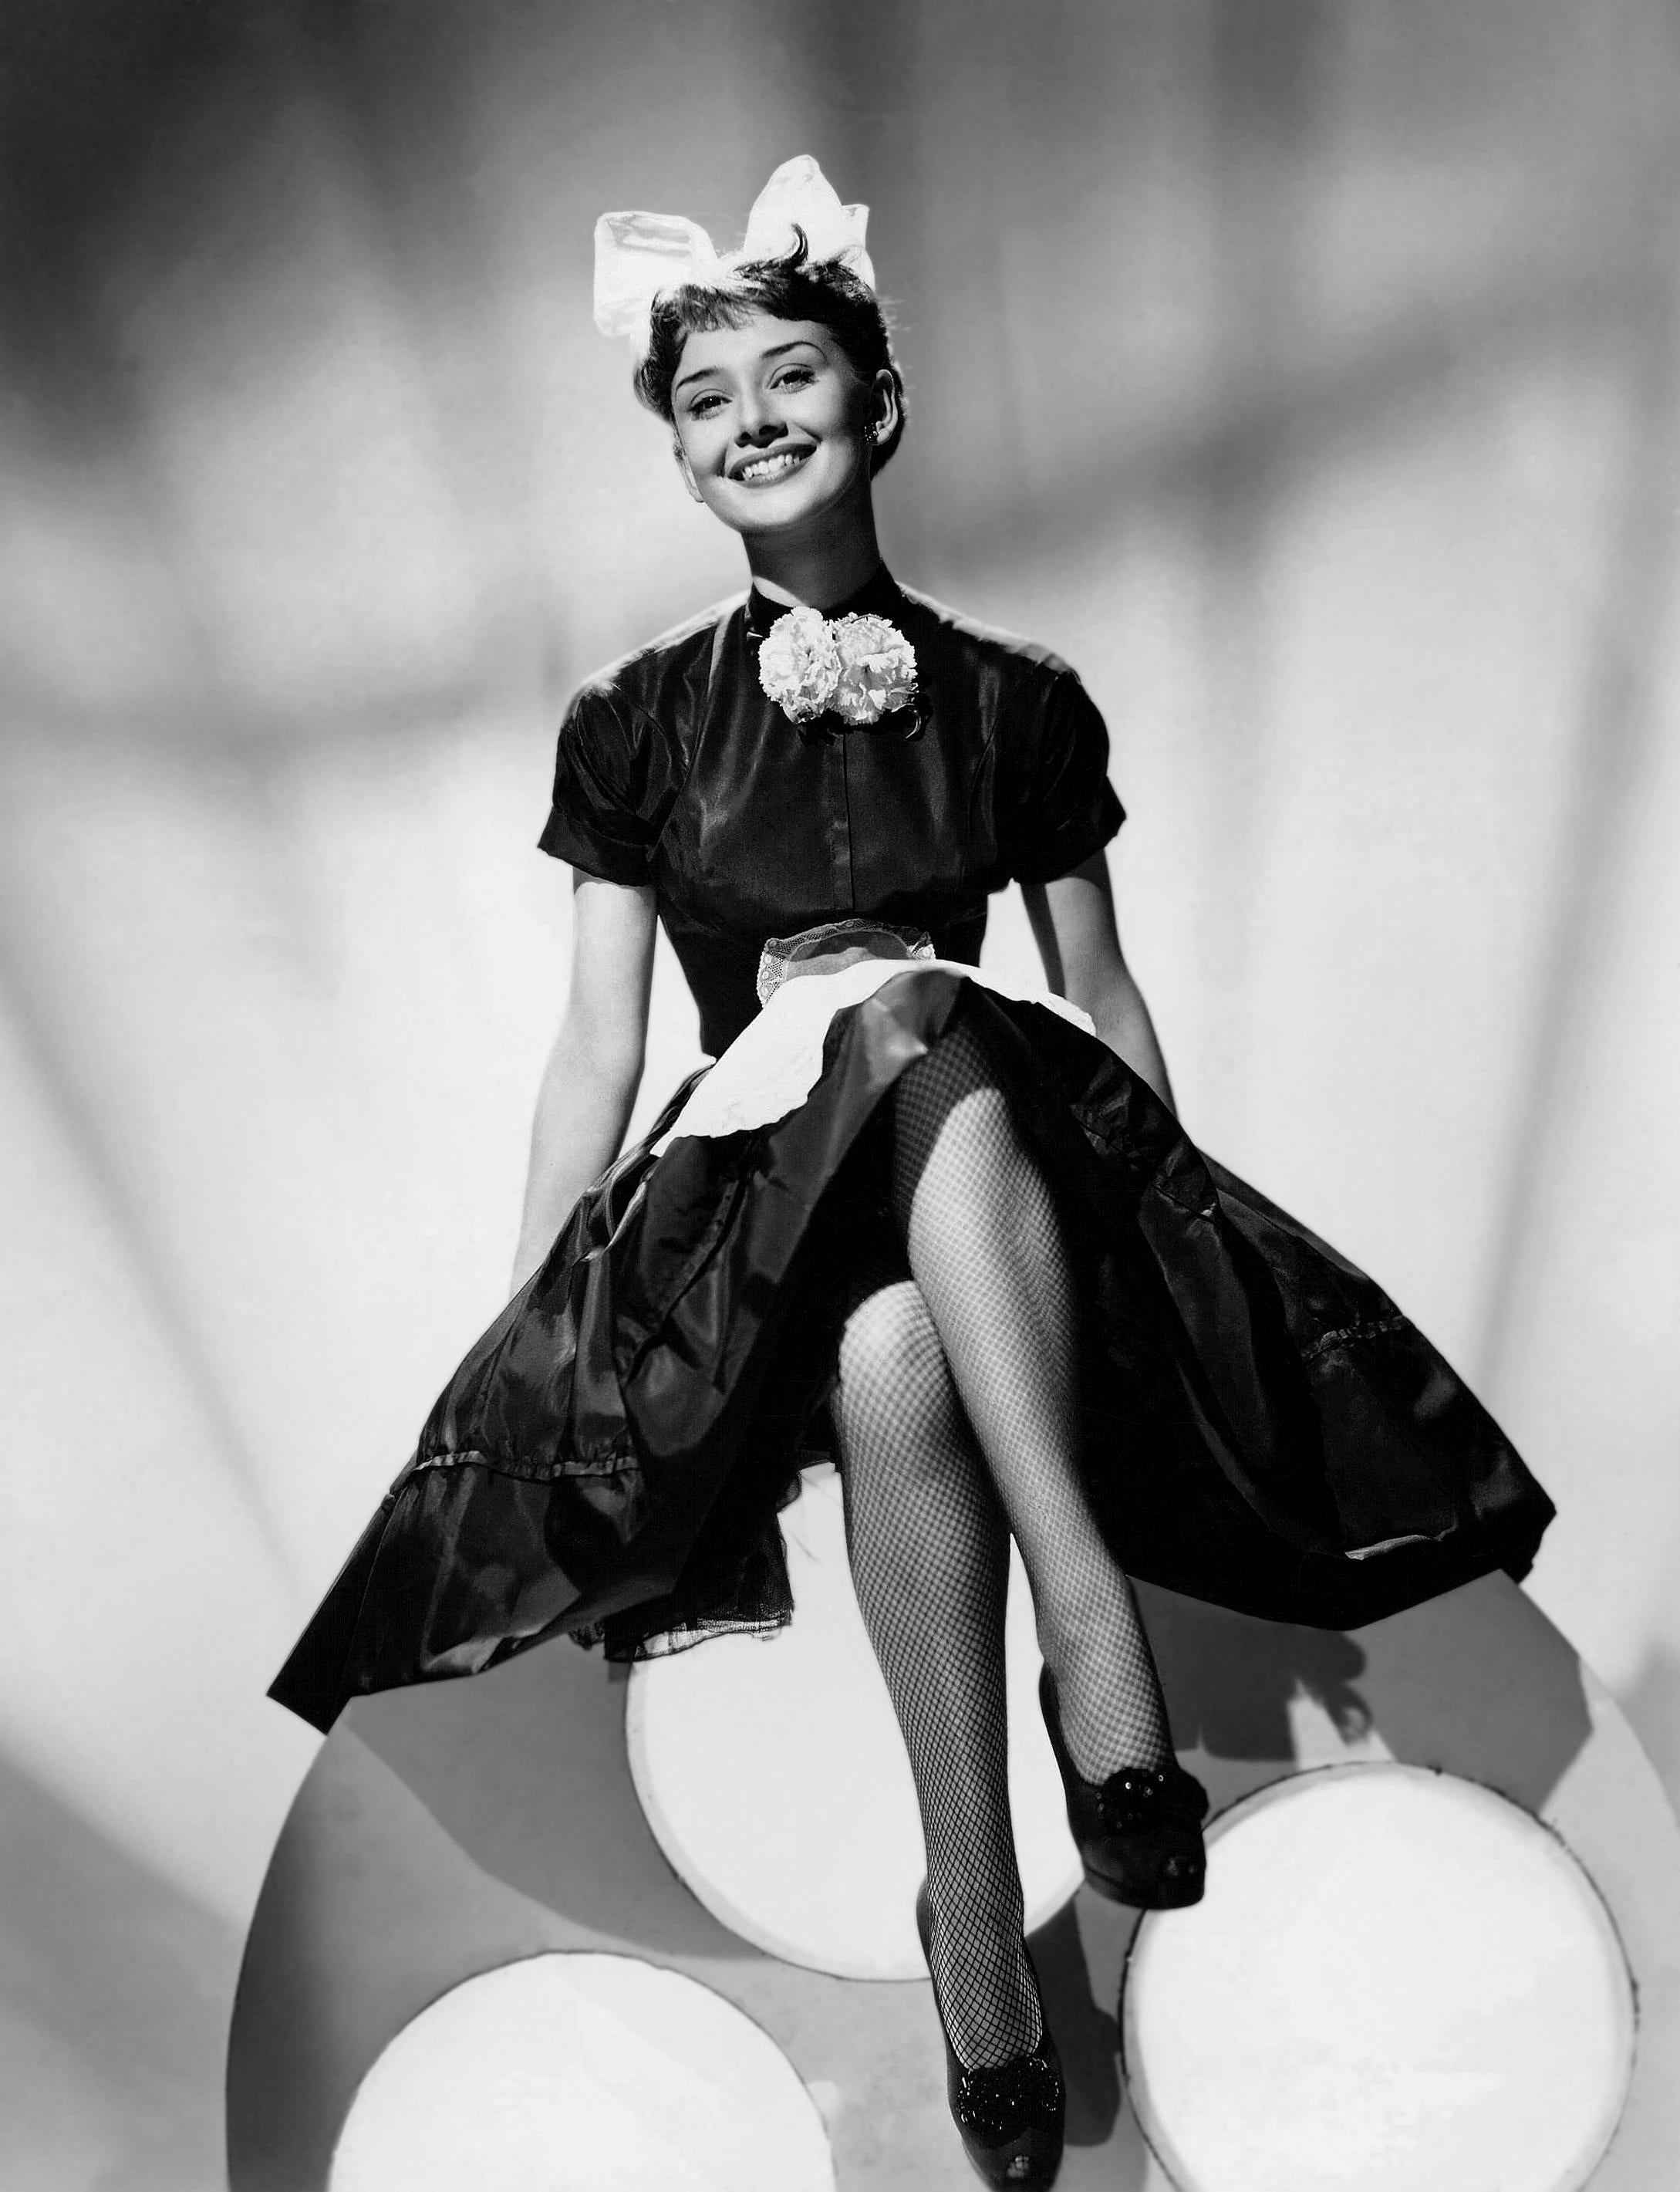 Unknown Black and White Photograph - Audrey Hepburn Smiling in Bow Globe Photos Fine Art Print